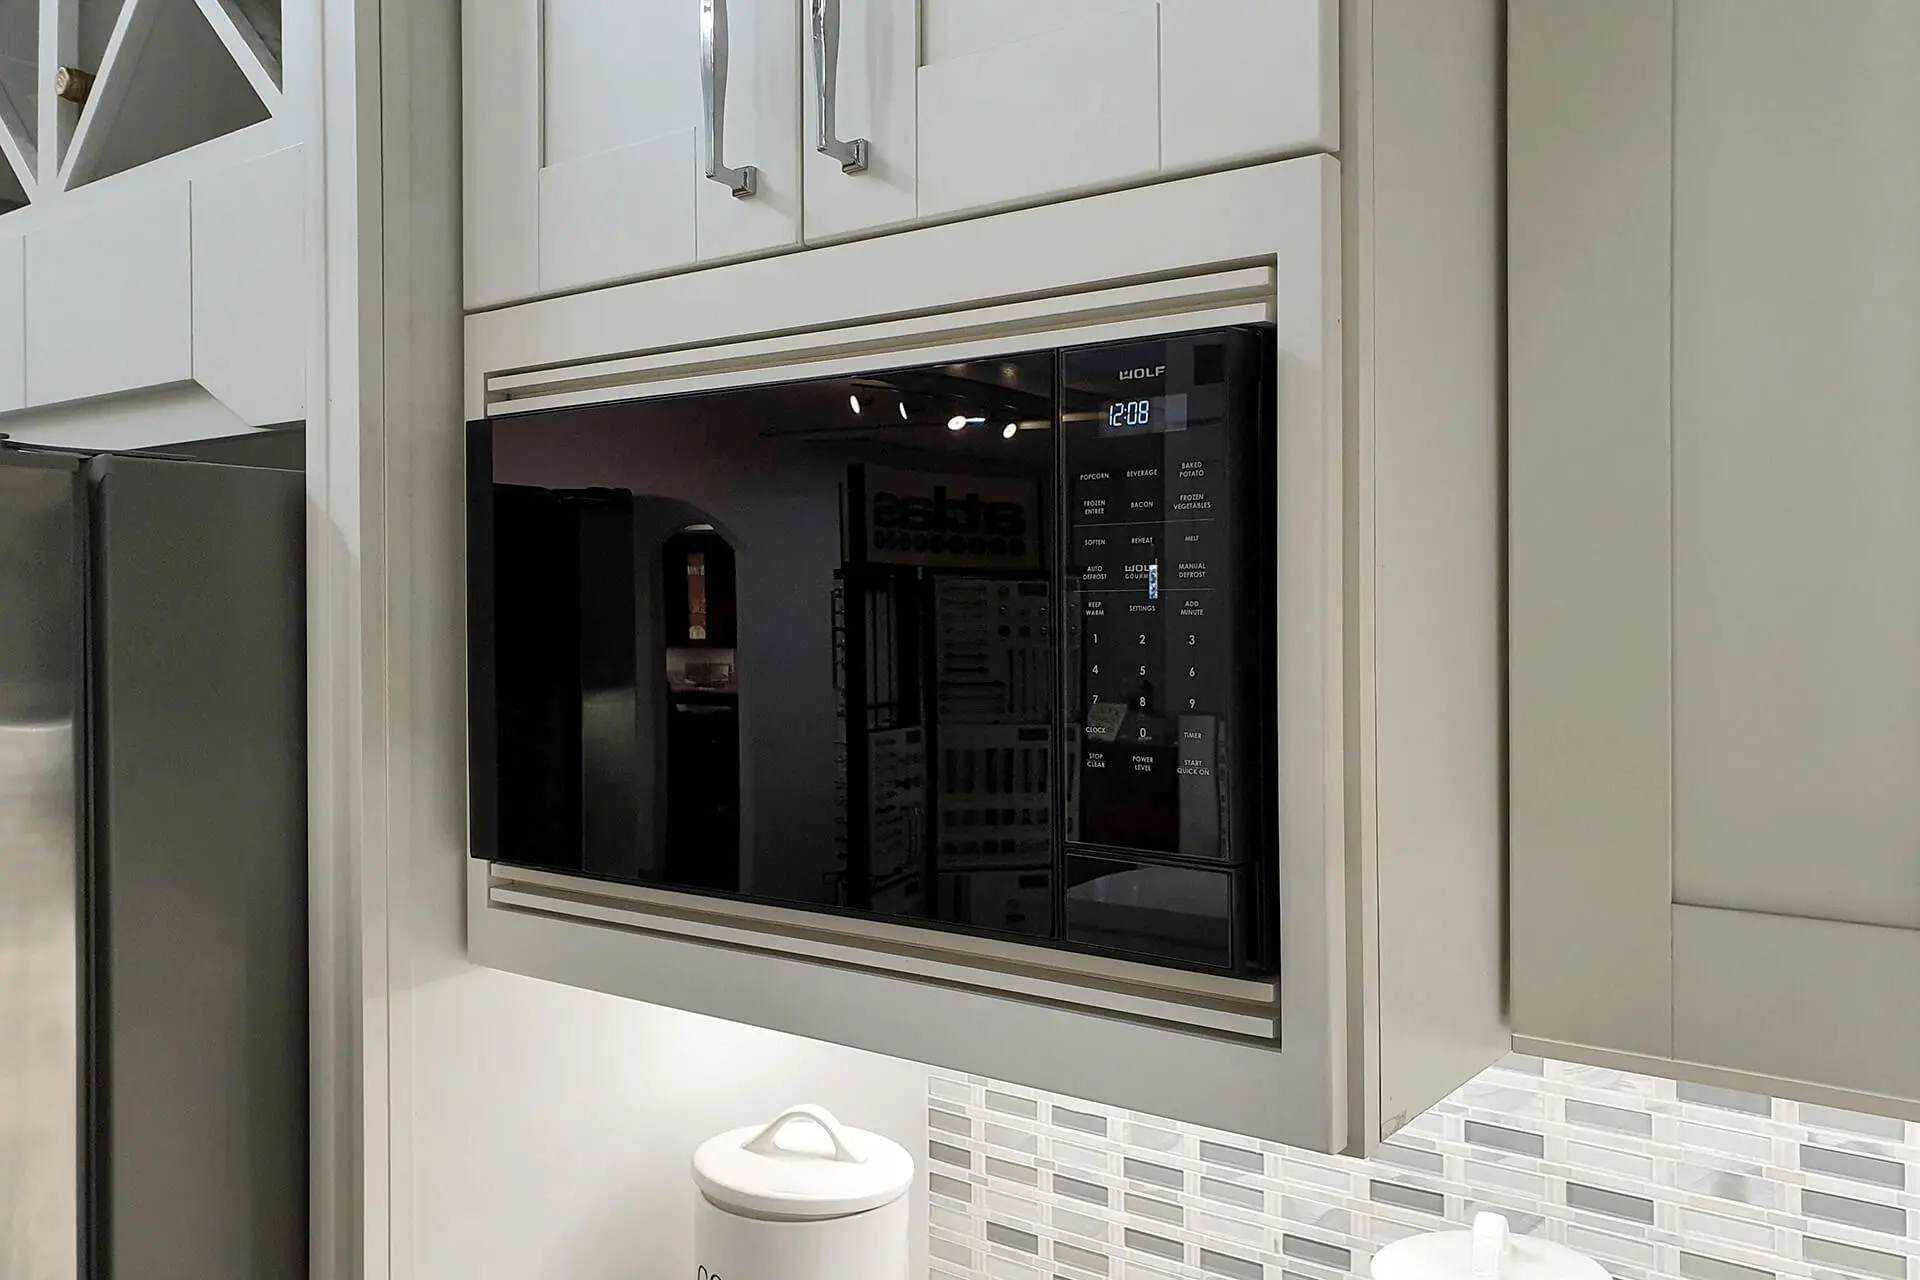 From open-shelf cabinets to built-in cabinets with wood trims, you have more ideas for placing your microwave.